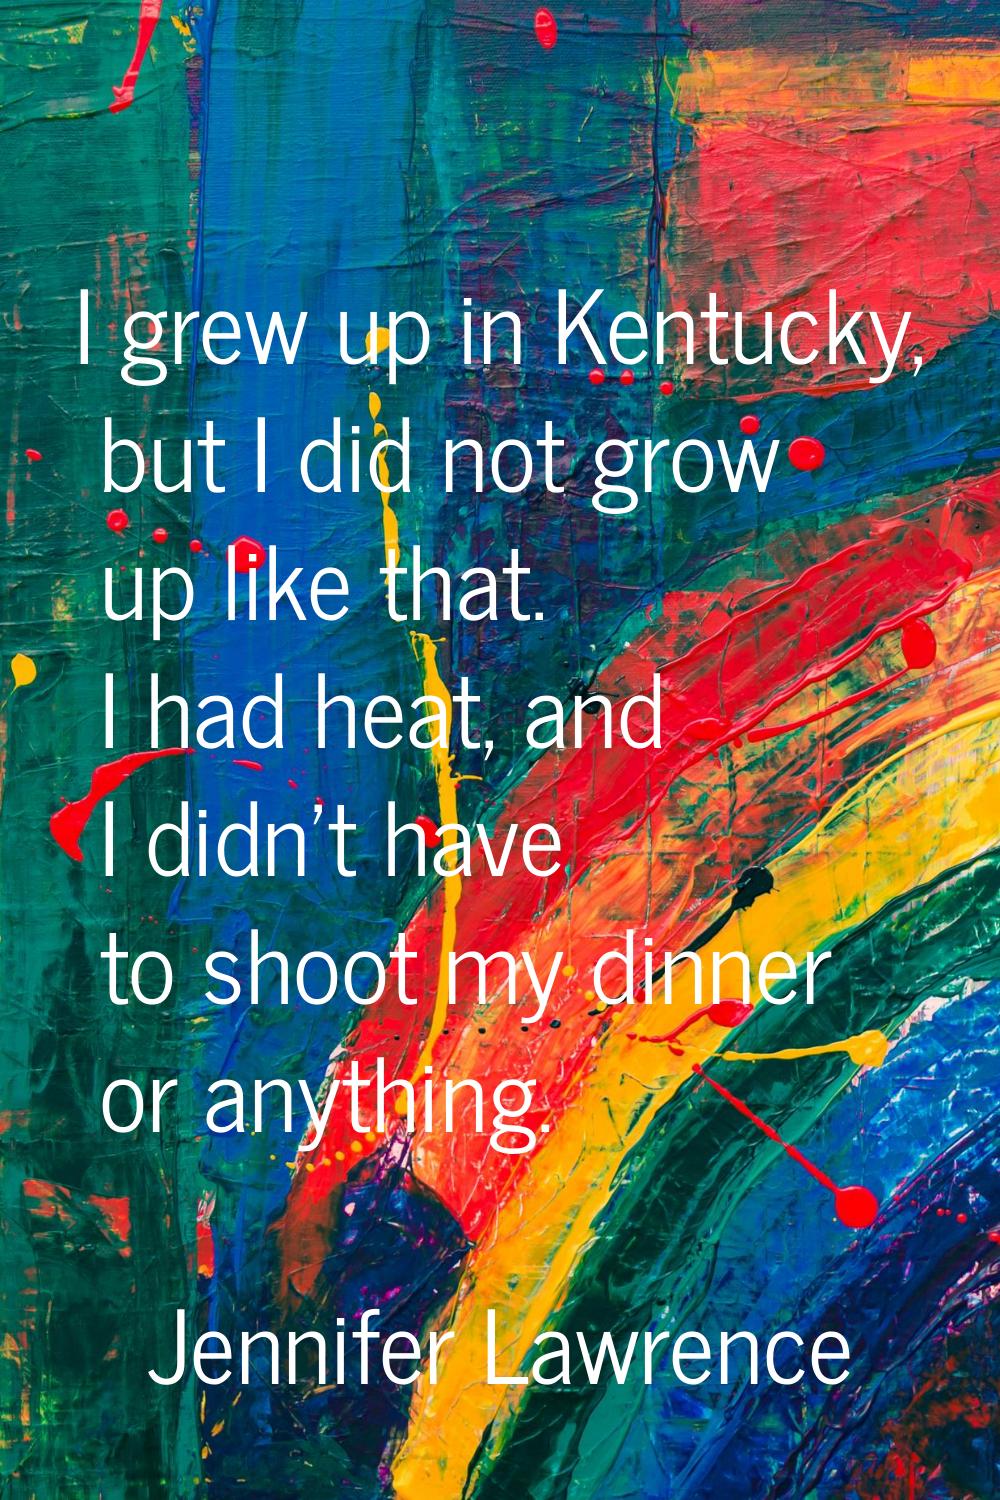 I grew up in Kentucky, but I did not grow up like that. I had heat, and I didn't have to shoot my d